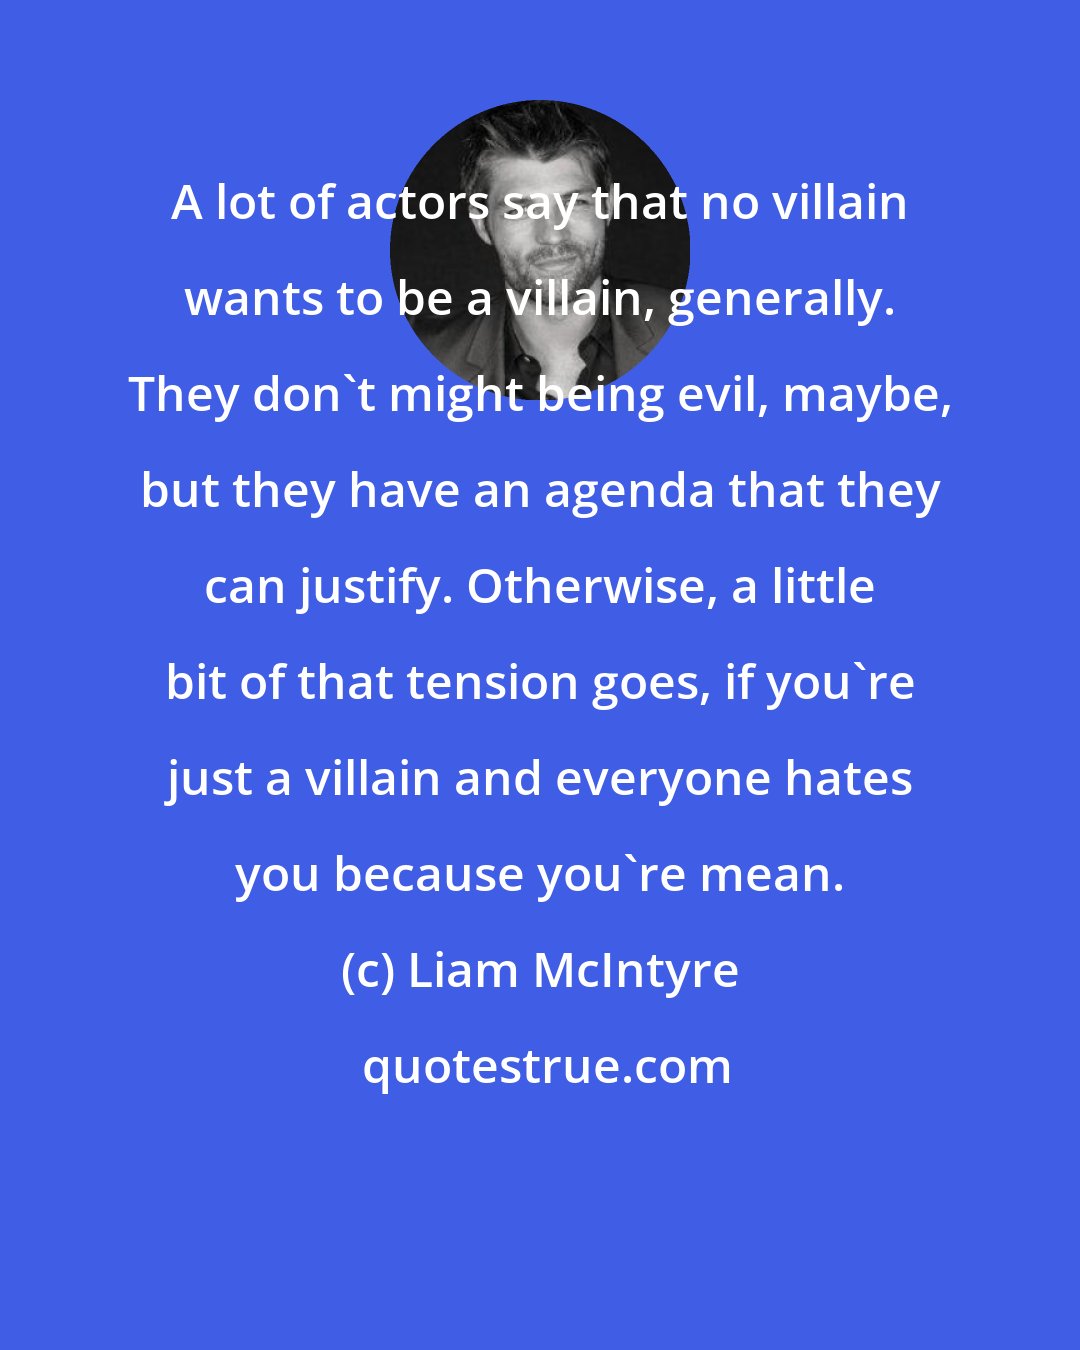 Liam McIntyre: A lot of actors say that no villain wants to be a villain, generally. They don't might being evil, maybe, but they have an agenda that they can justify. Otherwise, a little bit of that tension goes, if you're just a villain and everyone hates you because you're mean.